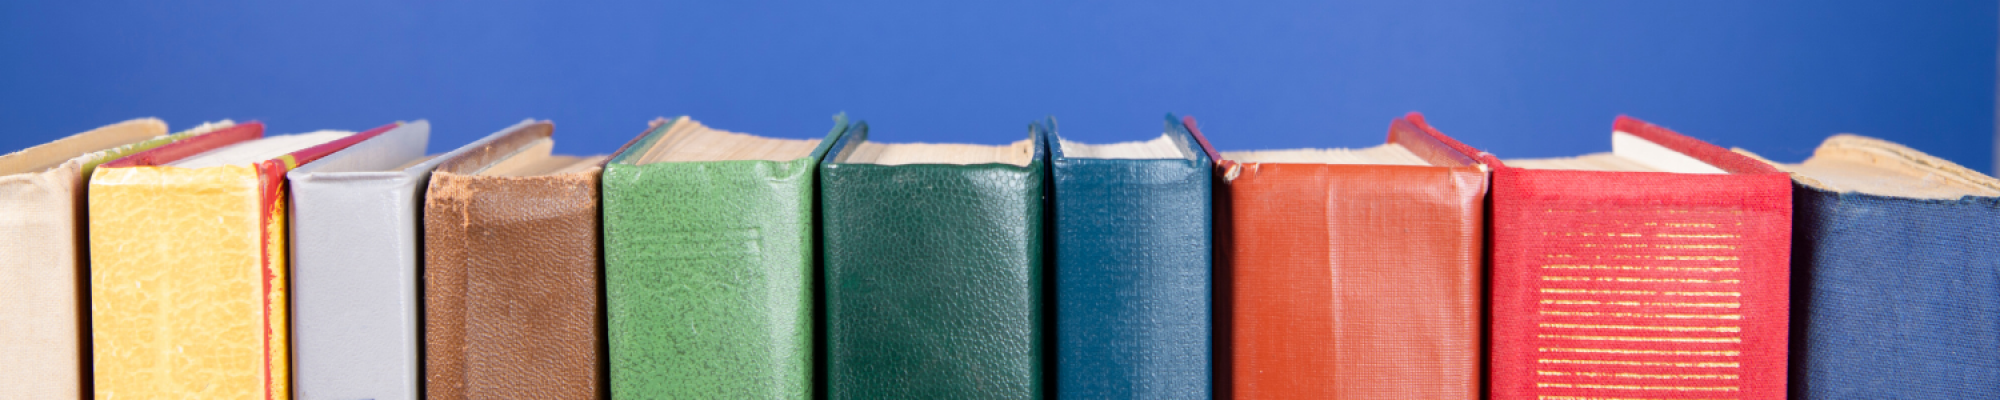 Row of different colored books on a dark blue background